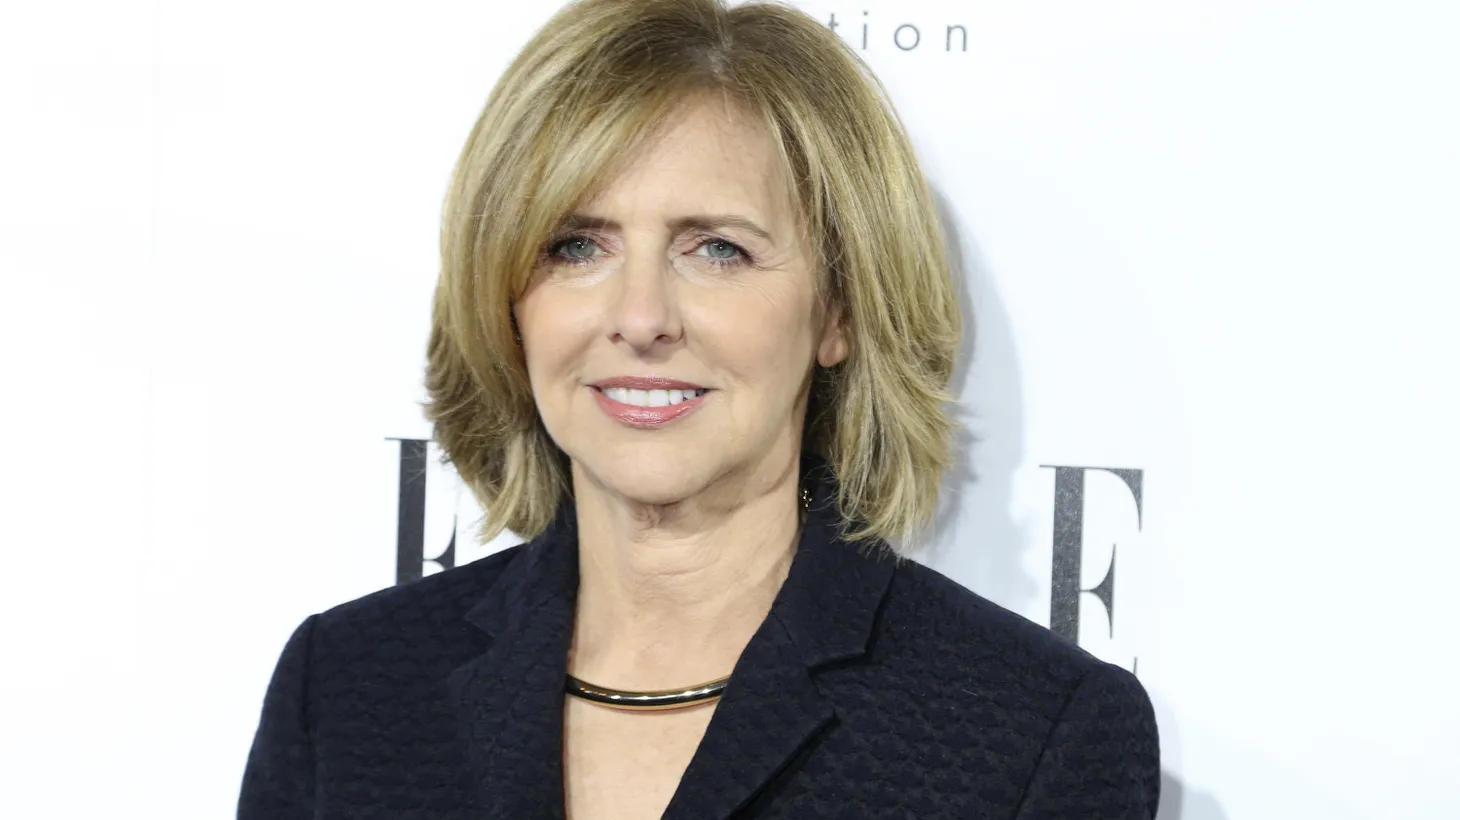 Film director Nancy Meyers arrives at the 20th anniversary of ELLE Women in Hollywood event in Los Angeles on October 21, 2013.